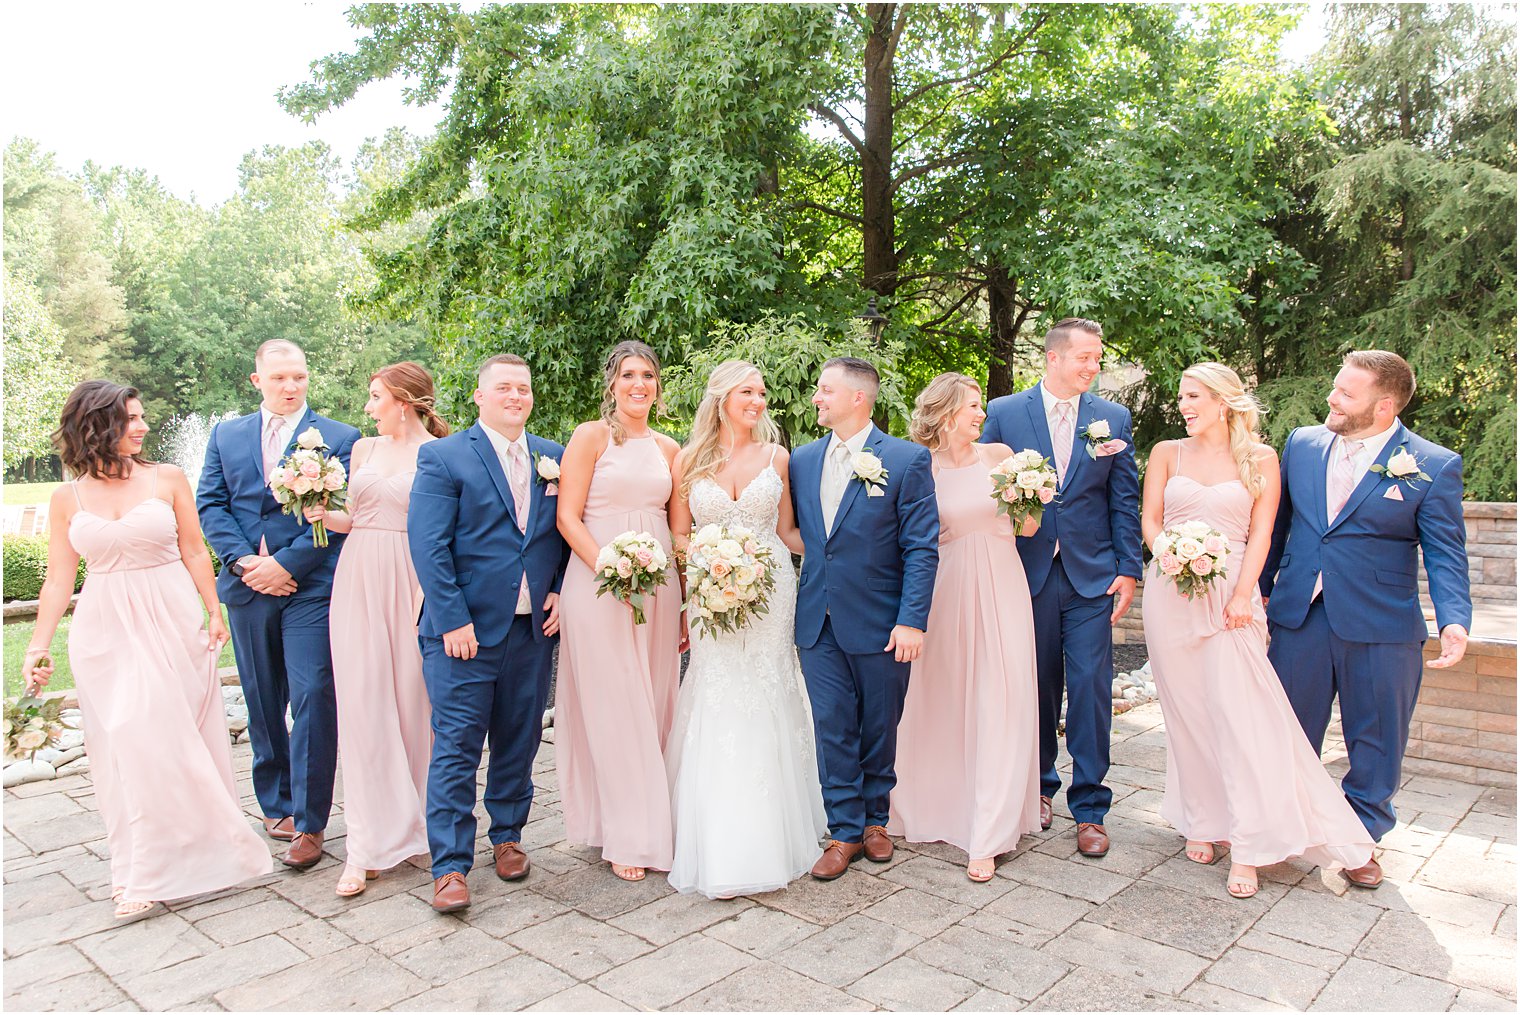 newlyweds stand with wedding party in pink and blue attire 